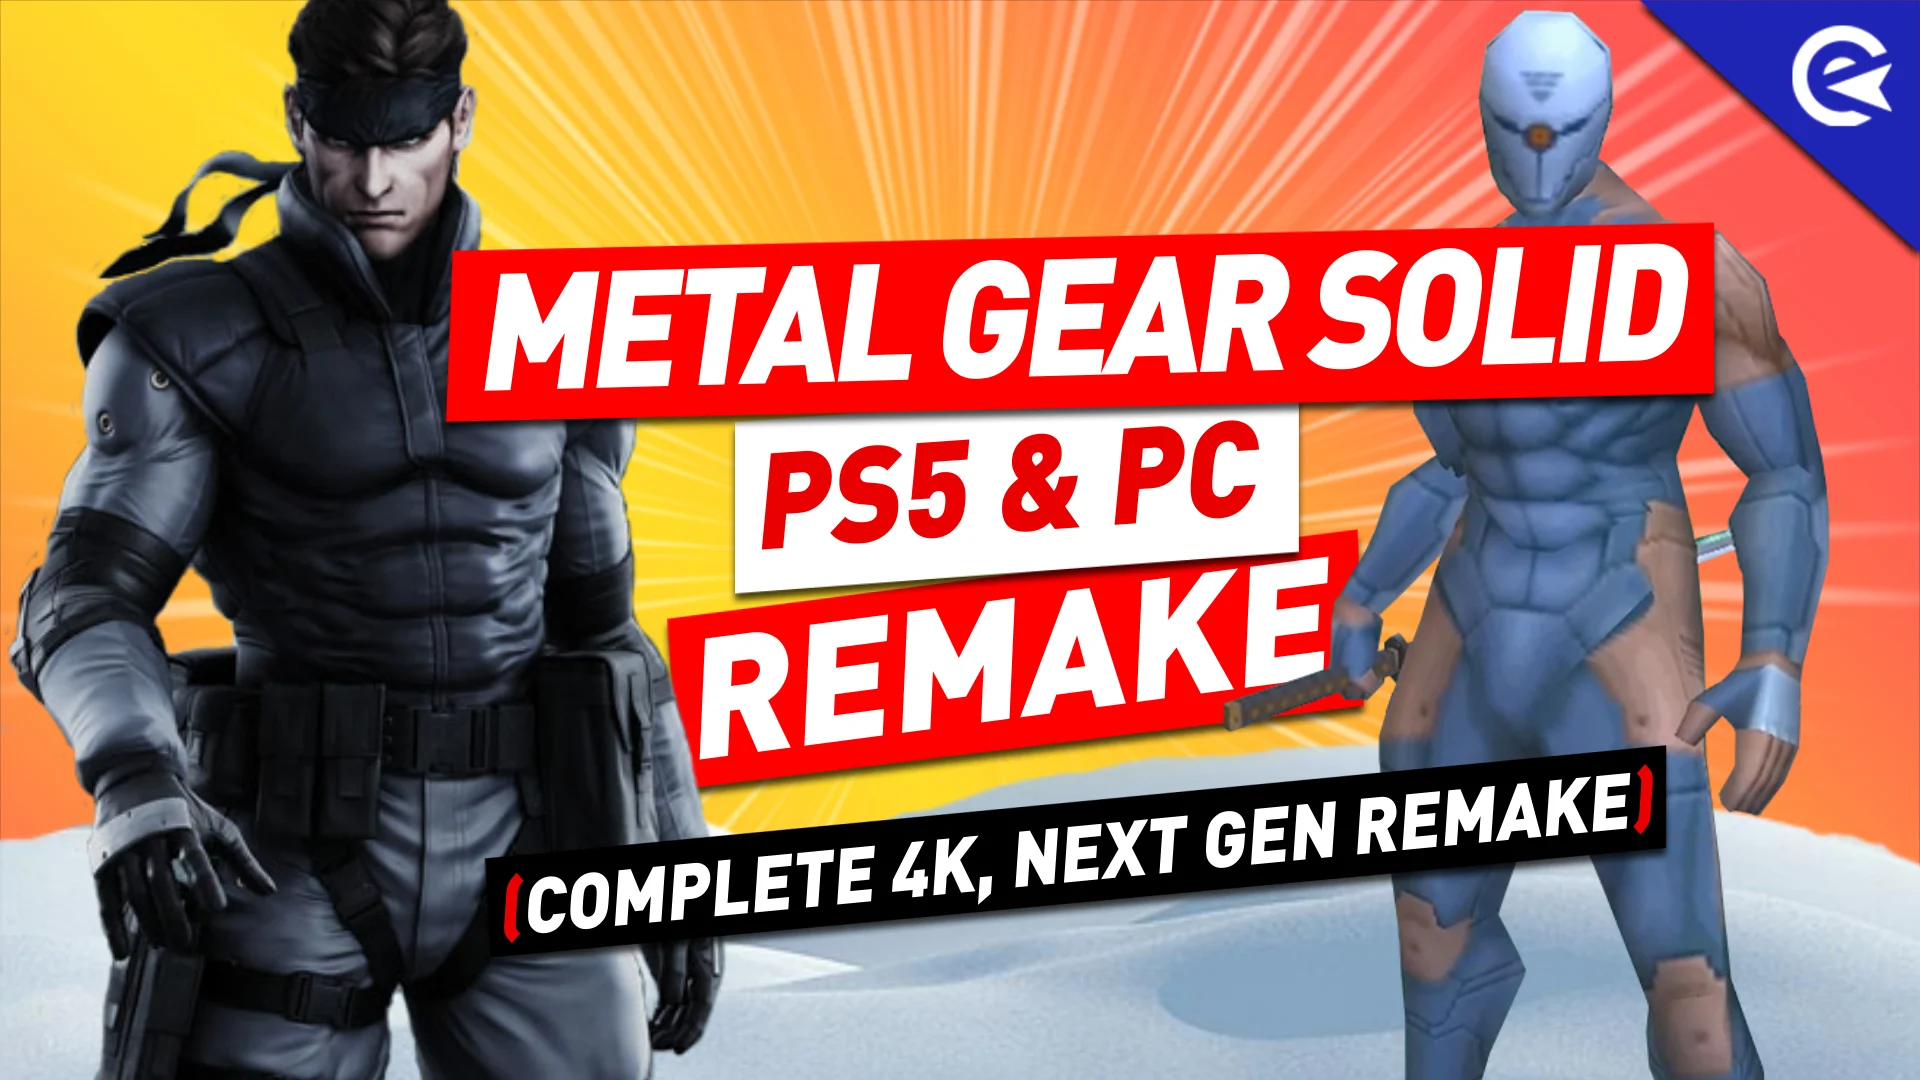 Metal Gear Solid is Getting a Complete 4K PS5 & PC Remake! on Vimeo